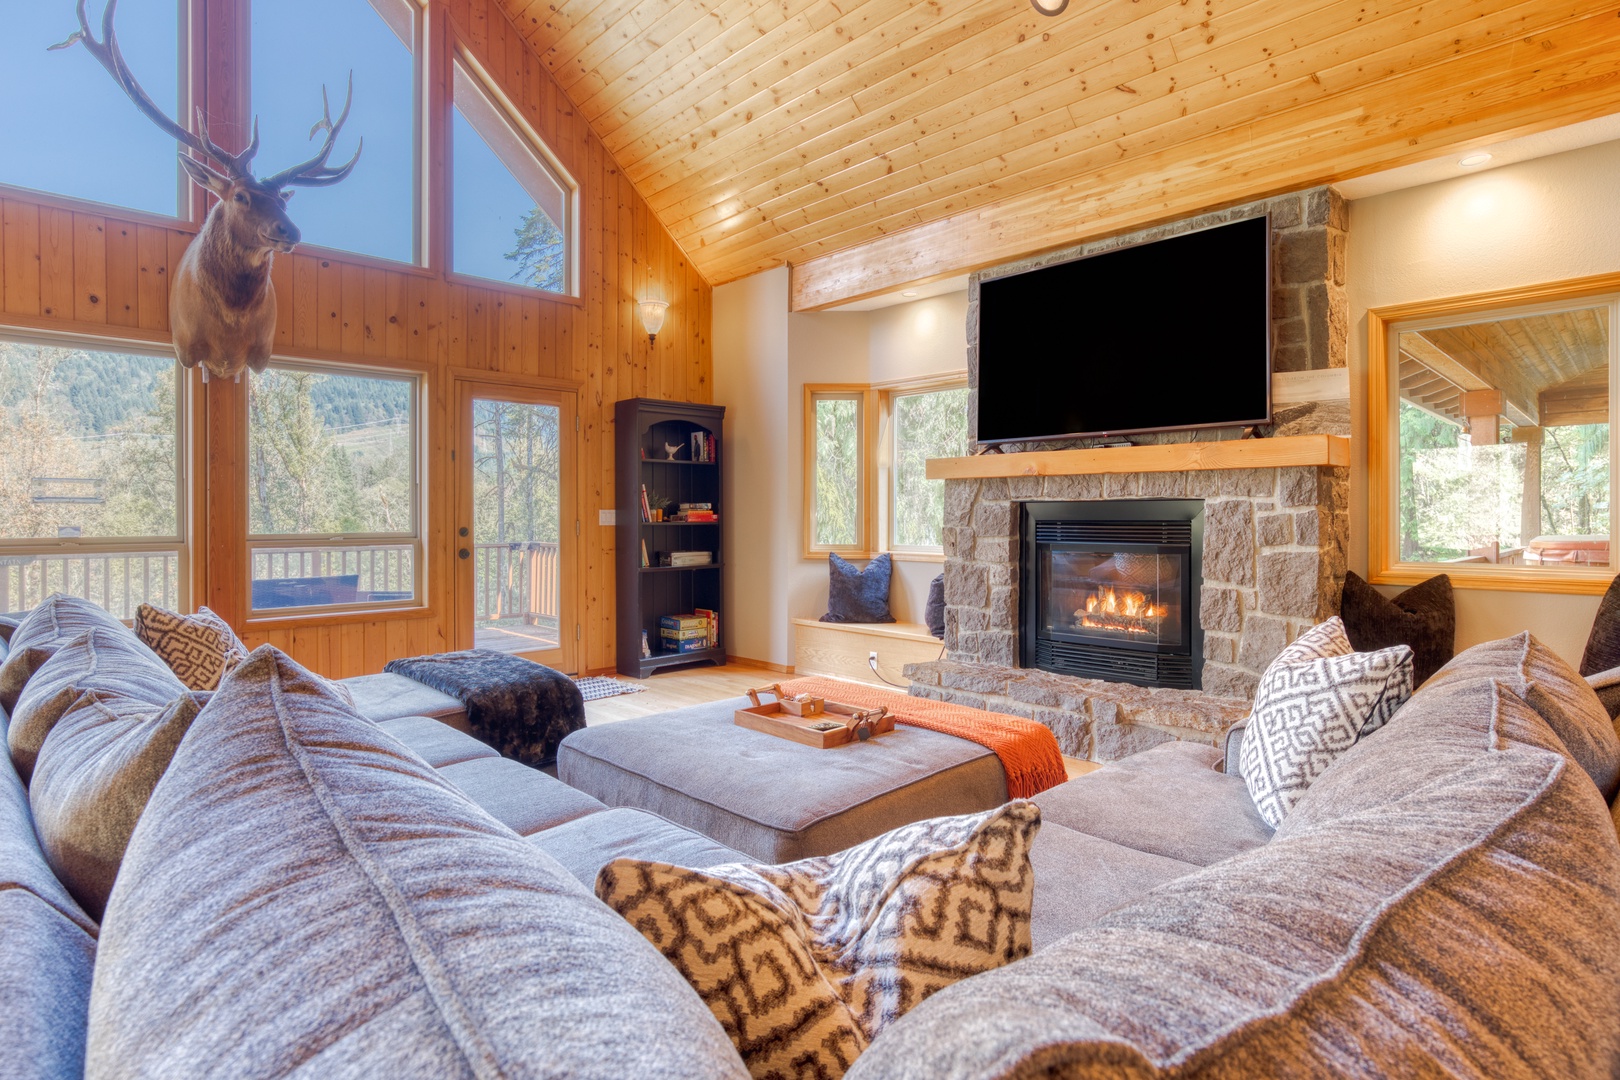 Sandy Vacation Rentals, Iron Mountain - Relax in this great space